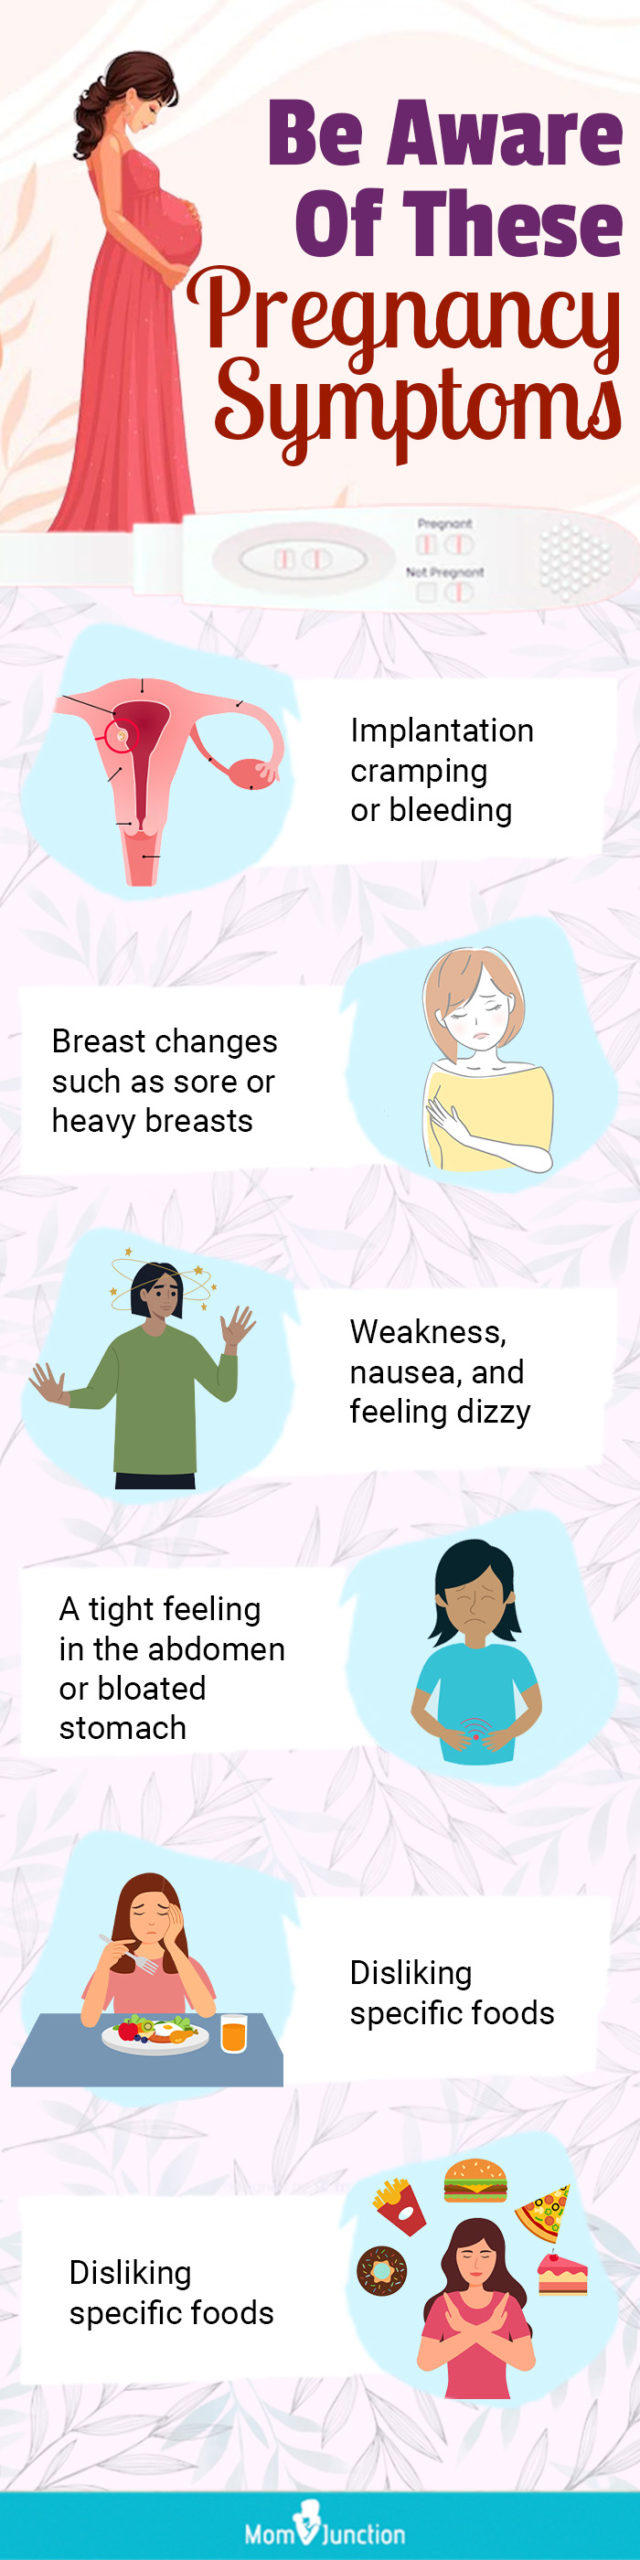 What are some common signs of pregnancy?